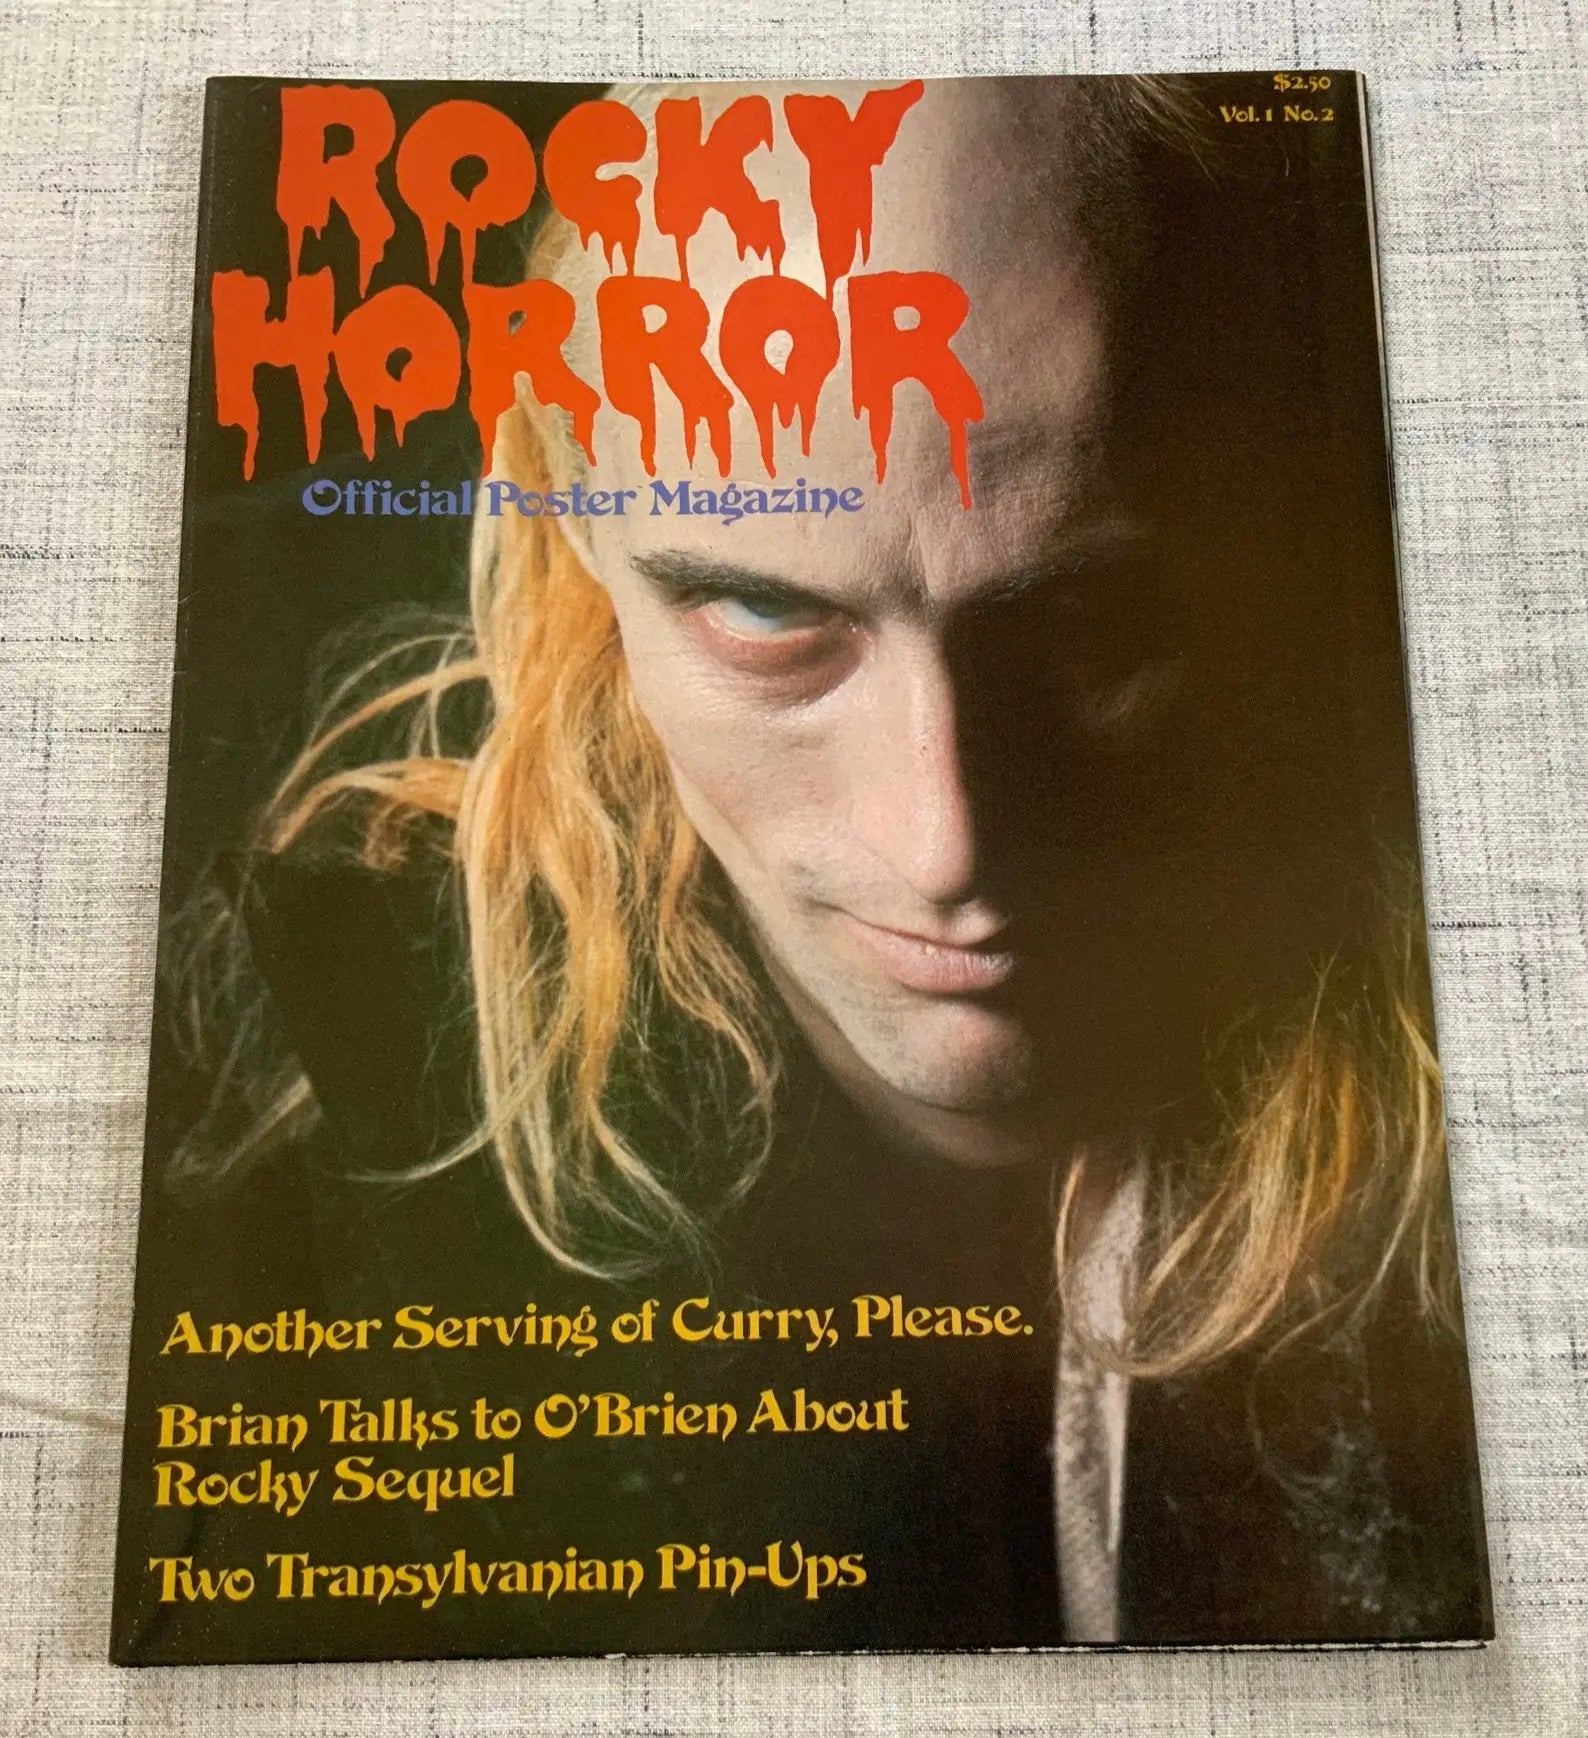 Cover of a Rocky Horror official poster magazine from 1979 with Richard O’Brian as Riff Raff as cover image